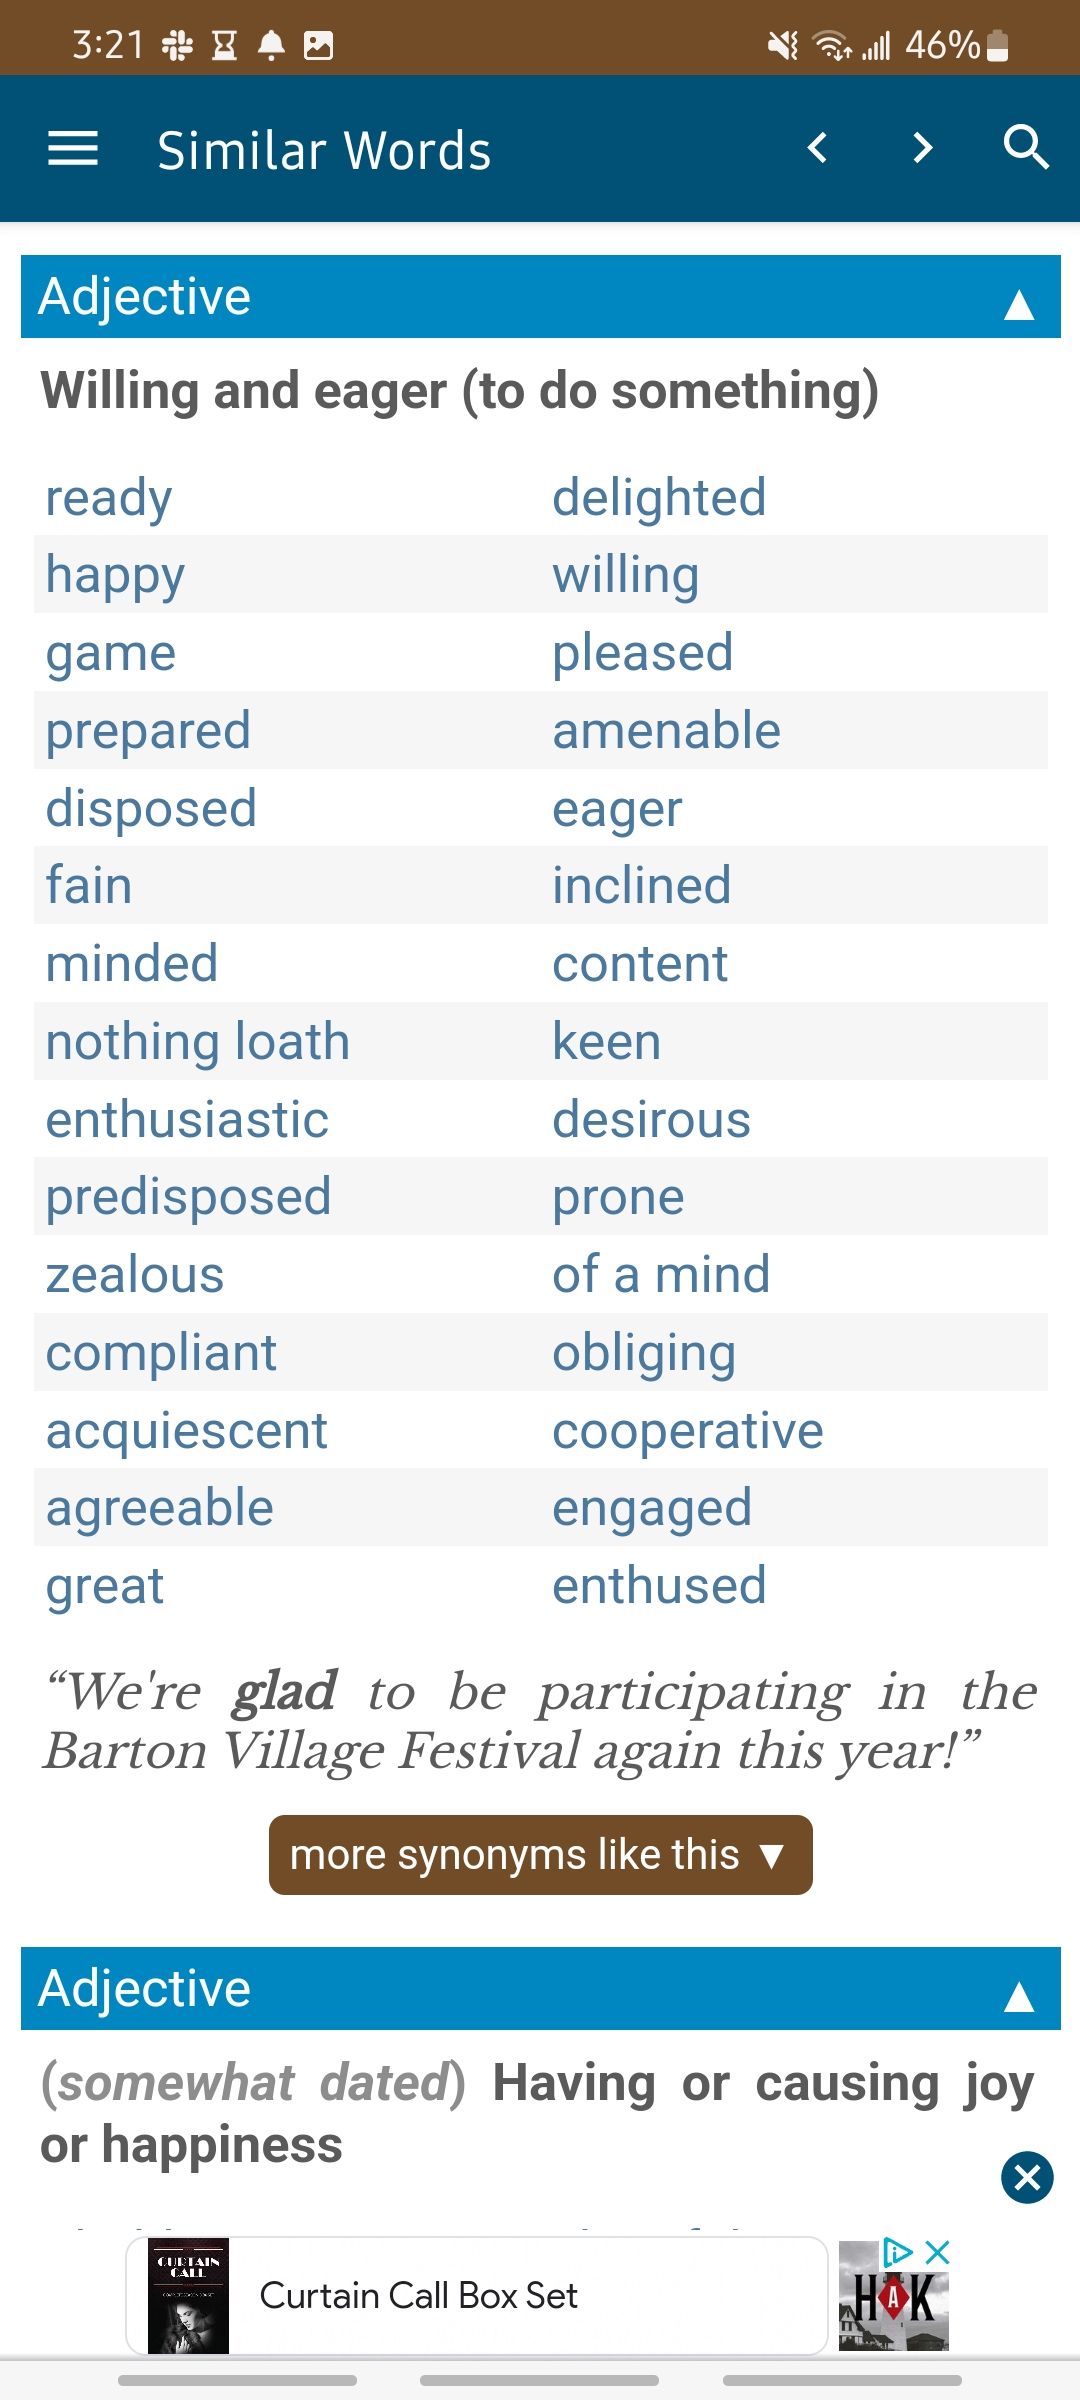 Synonyms for additional definitions of the word glad in the Word Hippo app